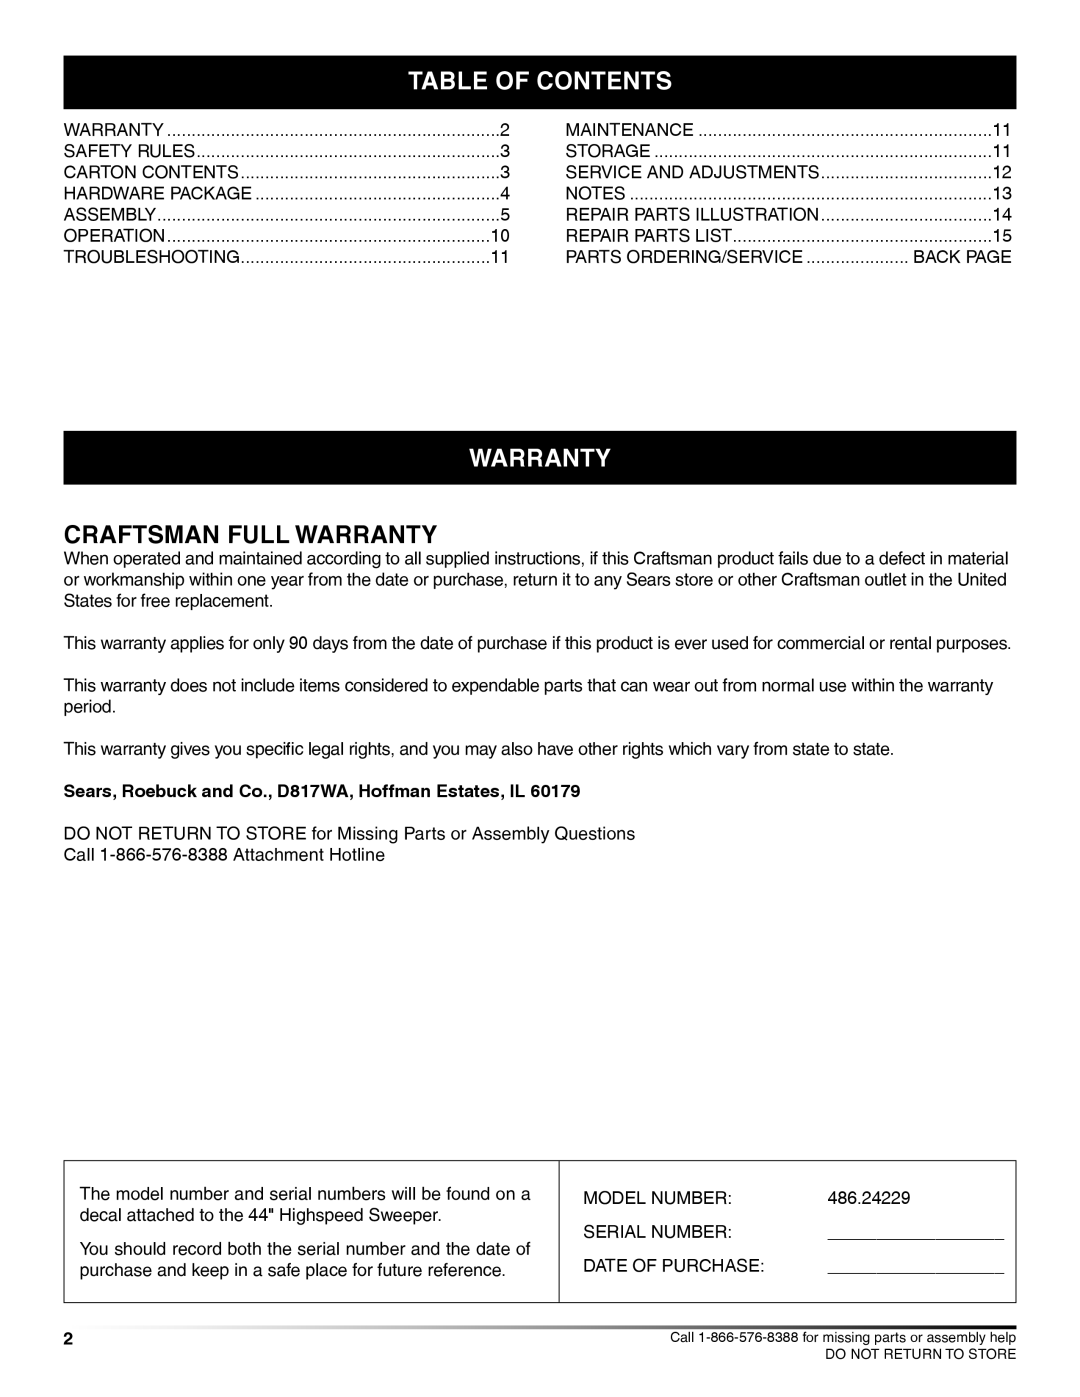 Craftsman 486.24229 manual Table Of Contents, Craftsman Full Warranty 